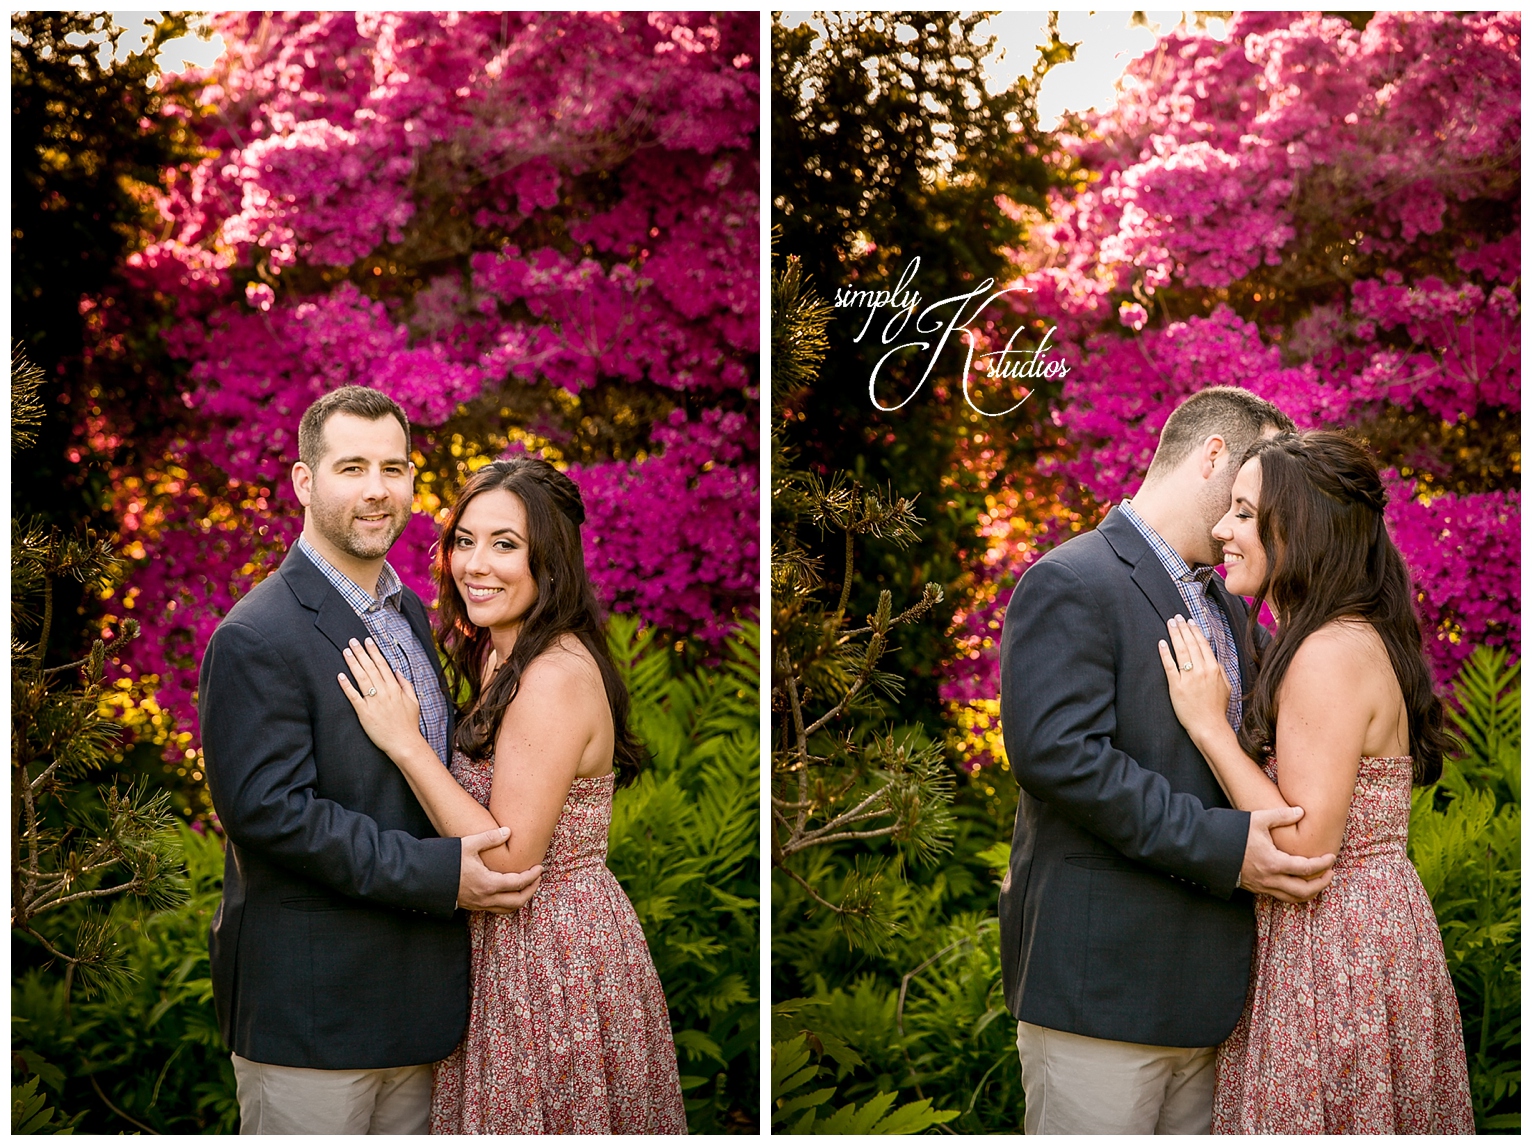 Spring Engagement Sessions in CT.jpg